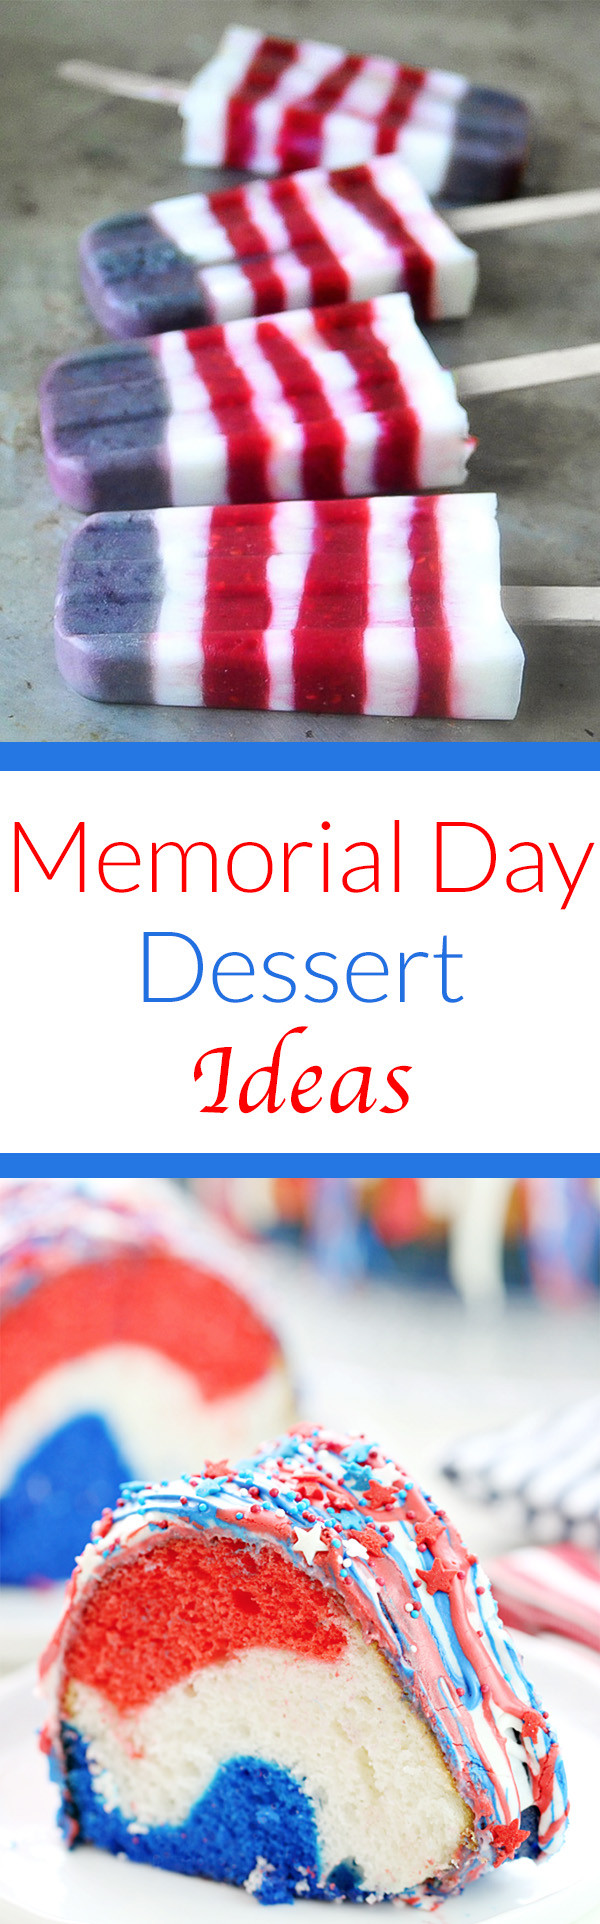 Memorial Day Dessert Ideas
 13 Memorial Day Desserts Party Guests Will Obsess Over